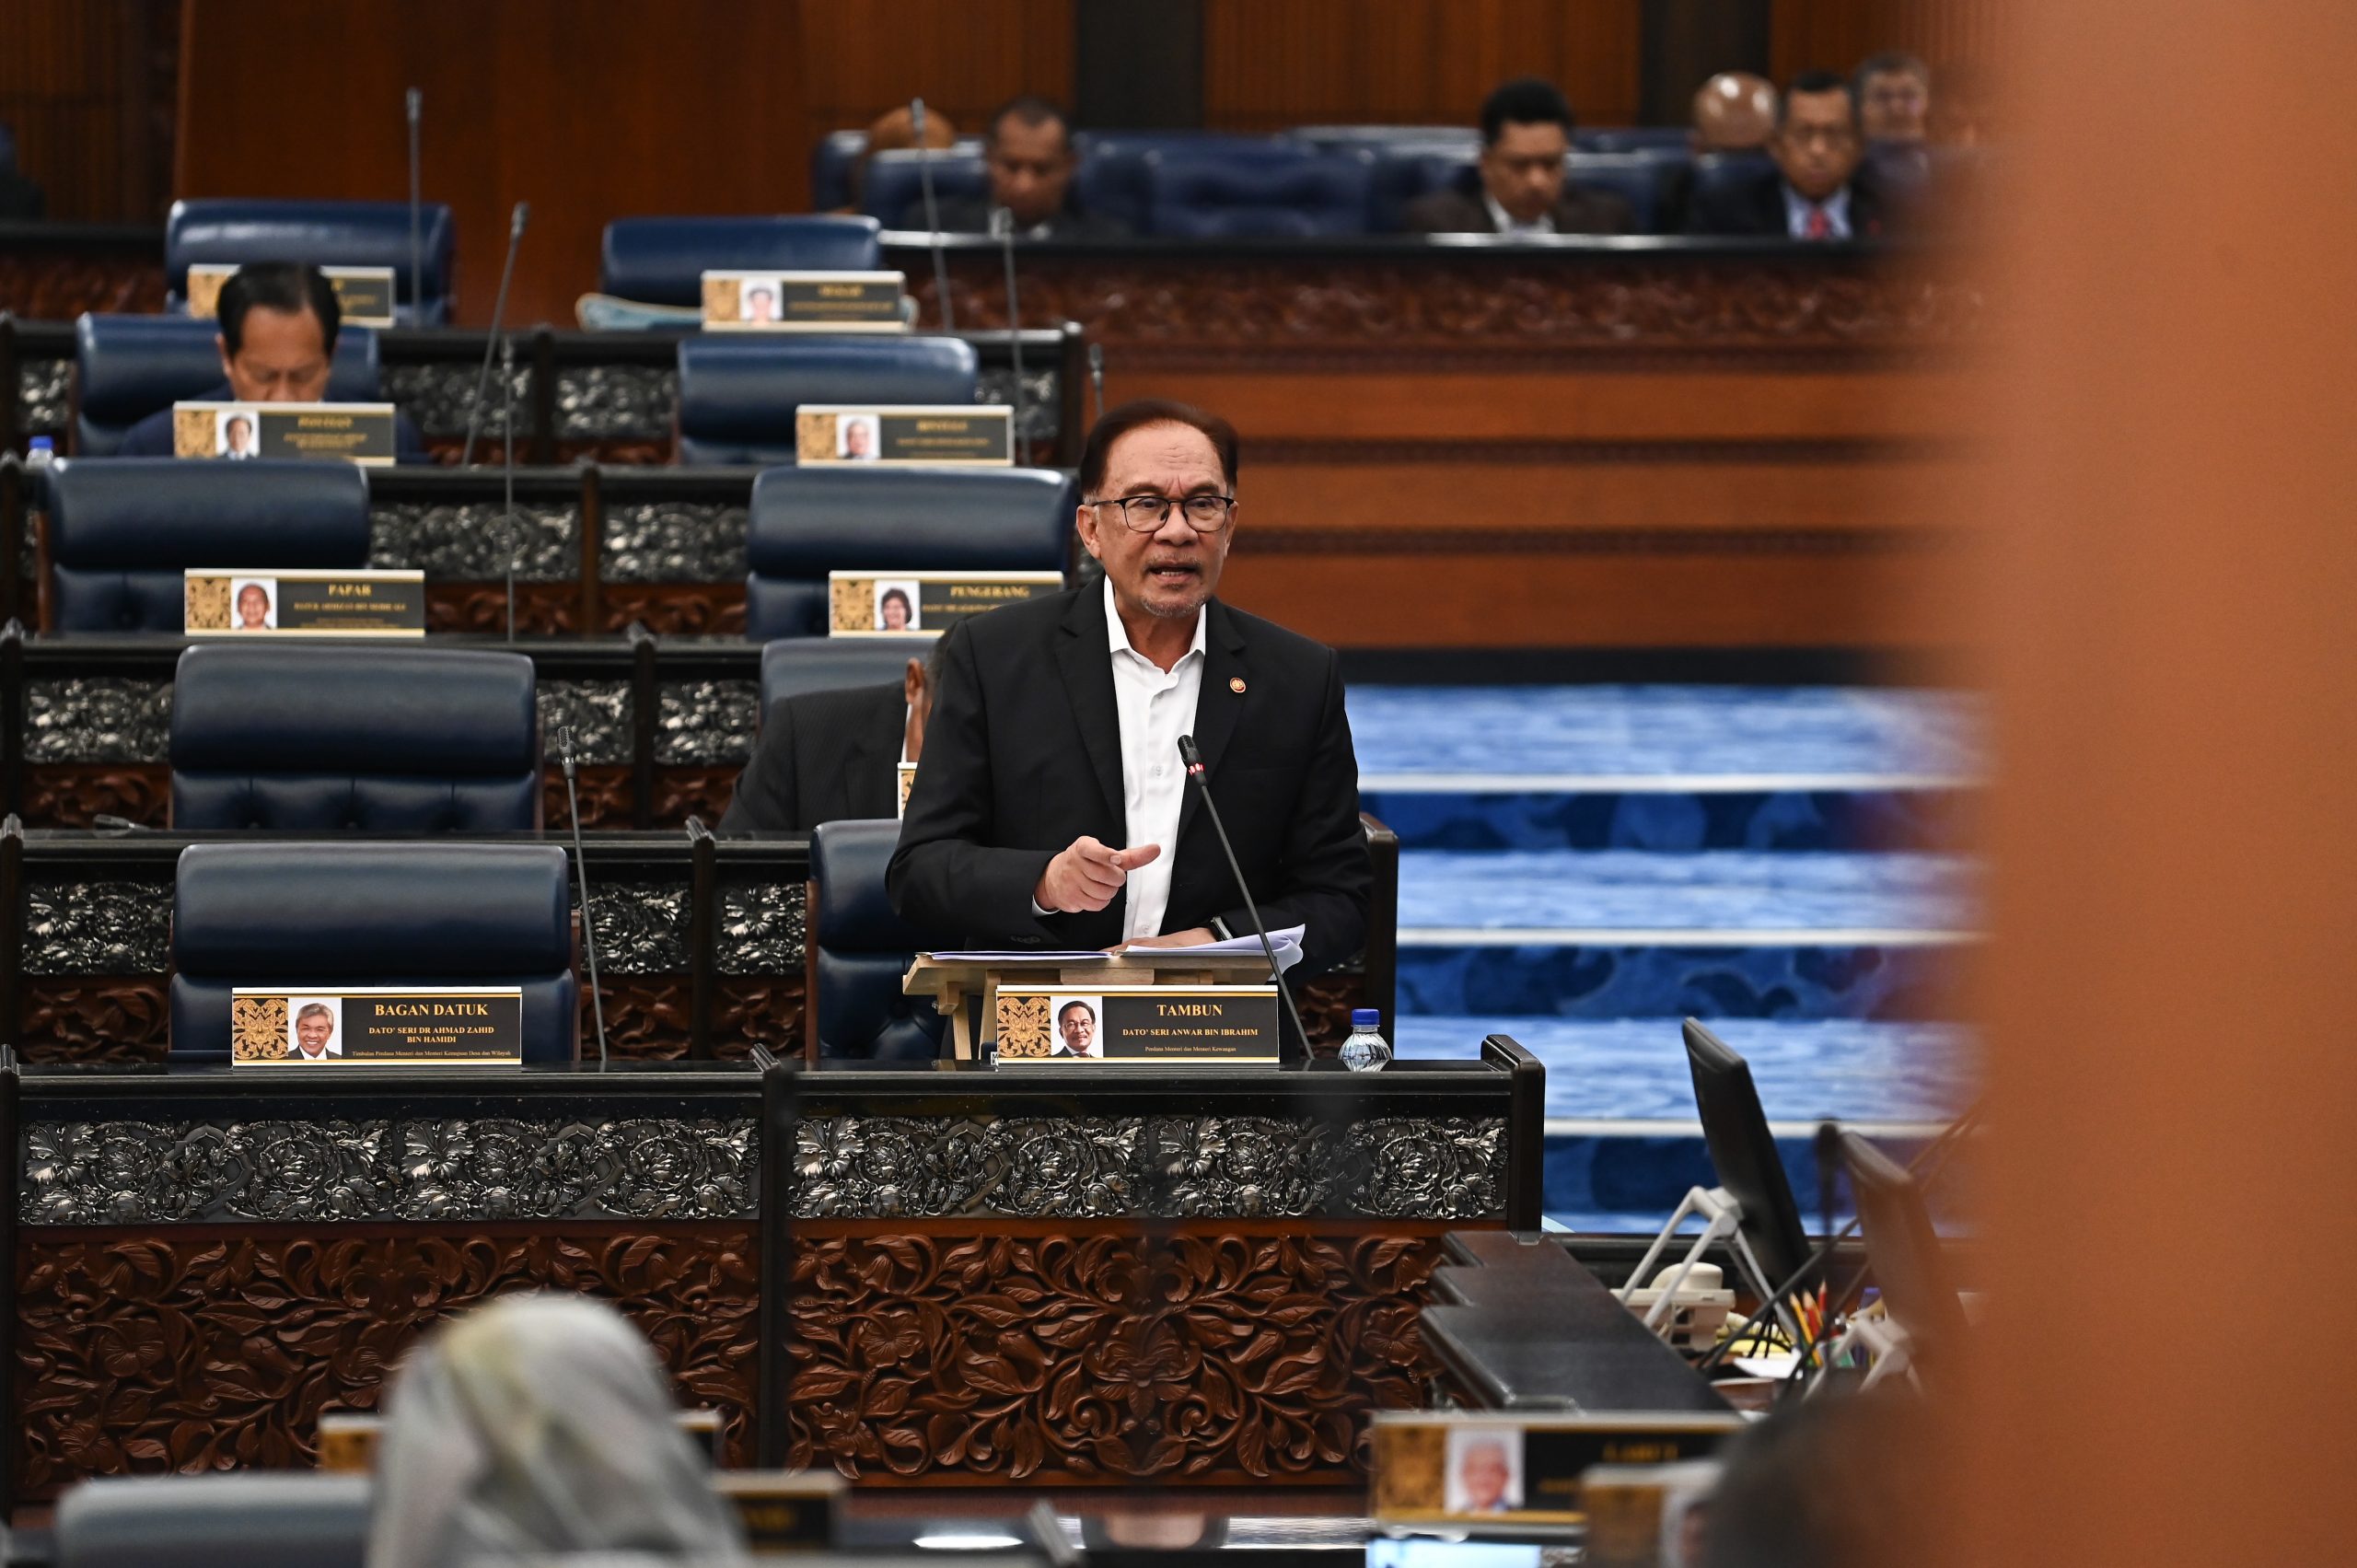 Implementation of targeted subsidies will improve Malaysia's competitiveness: Anwar